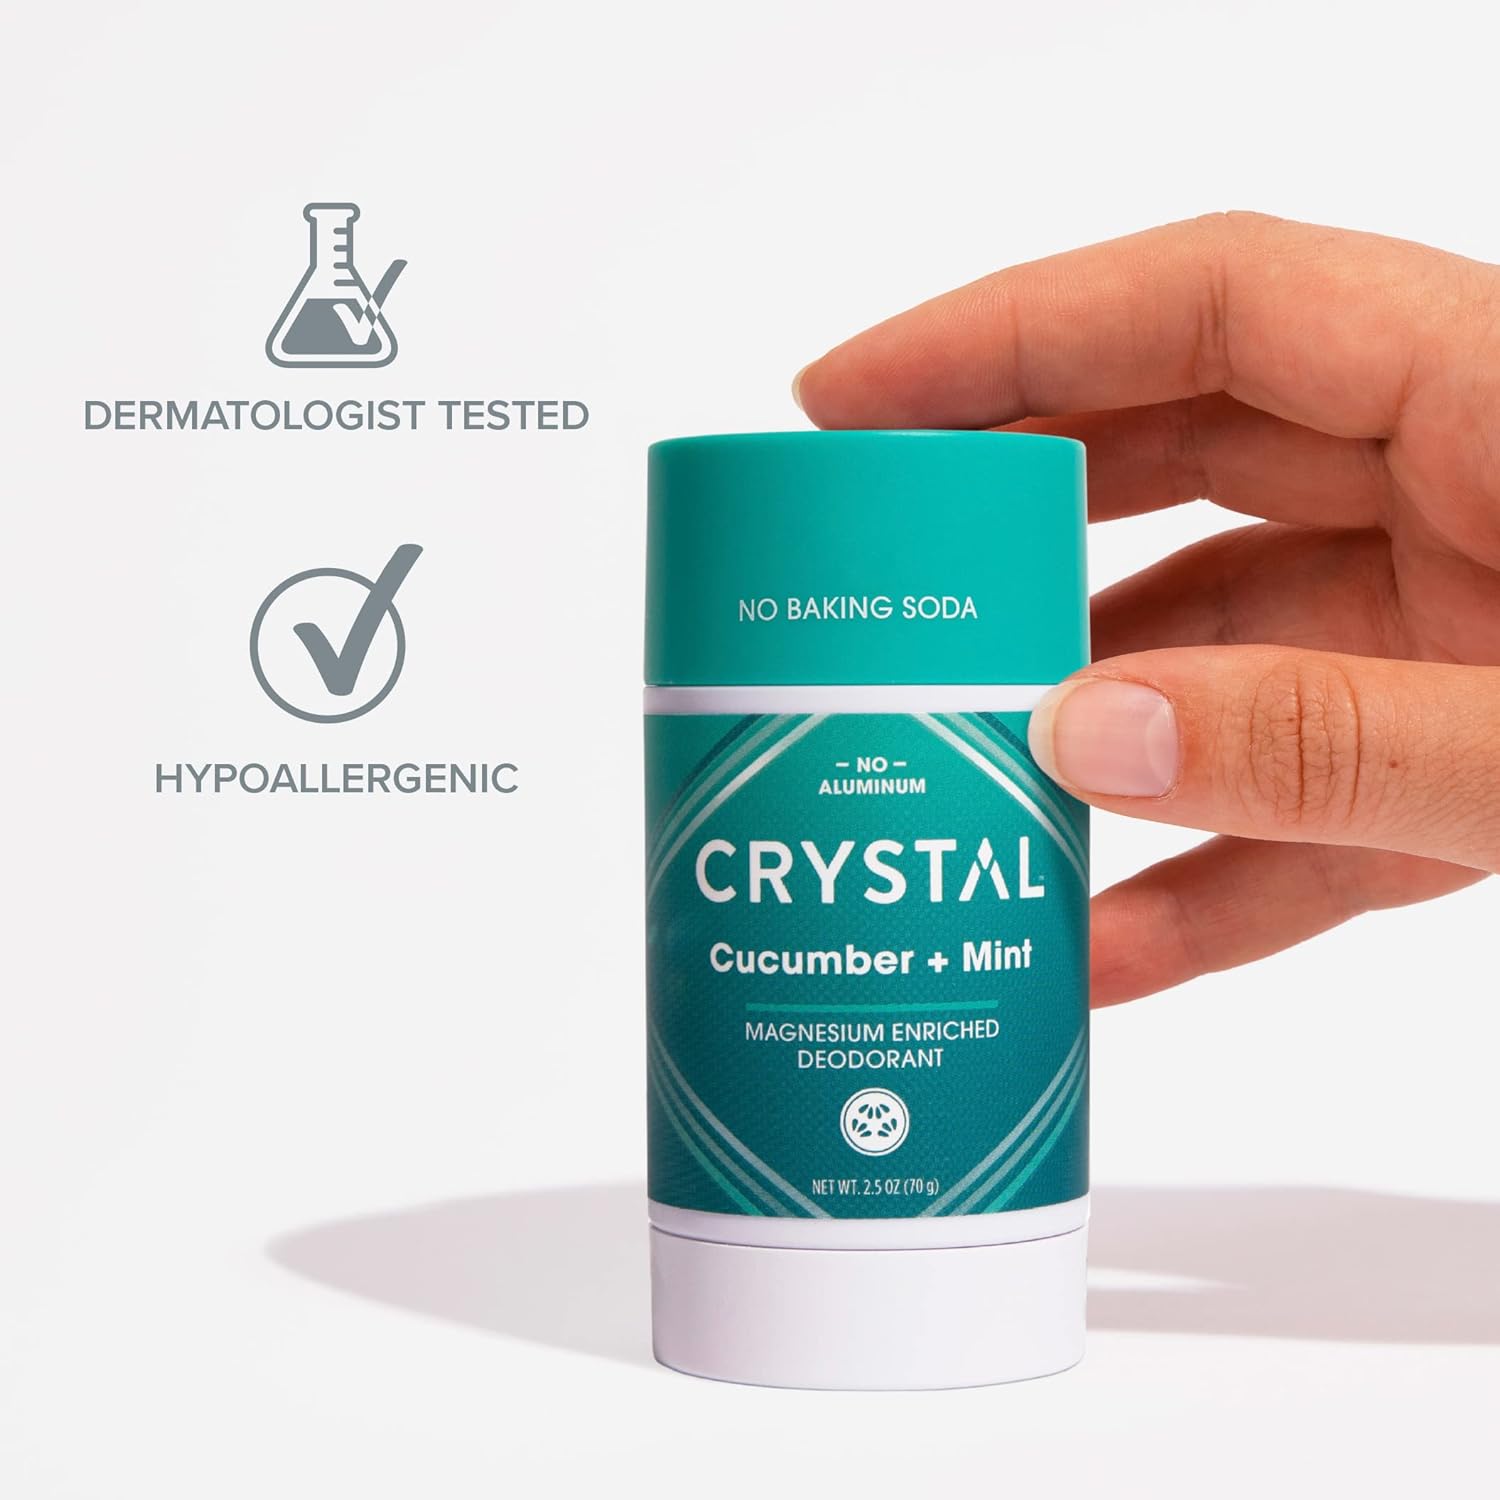 Crystal Magnesium Solid Stick Natural Deodorant, Non-Irritating Aluminum Free Deodorant for Men or Women, Safely and Effectively Fights Odor, Baking Soda Free, Cucumber + Mint, 2.5 oz : Beauty & Personal Care